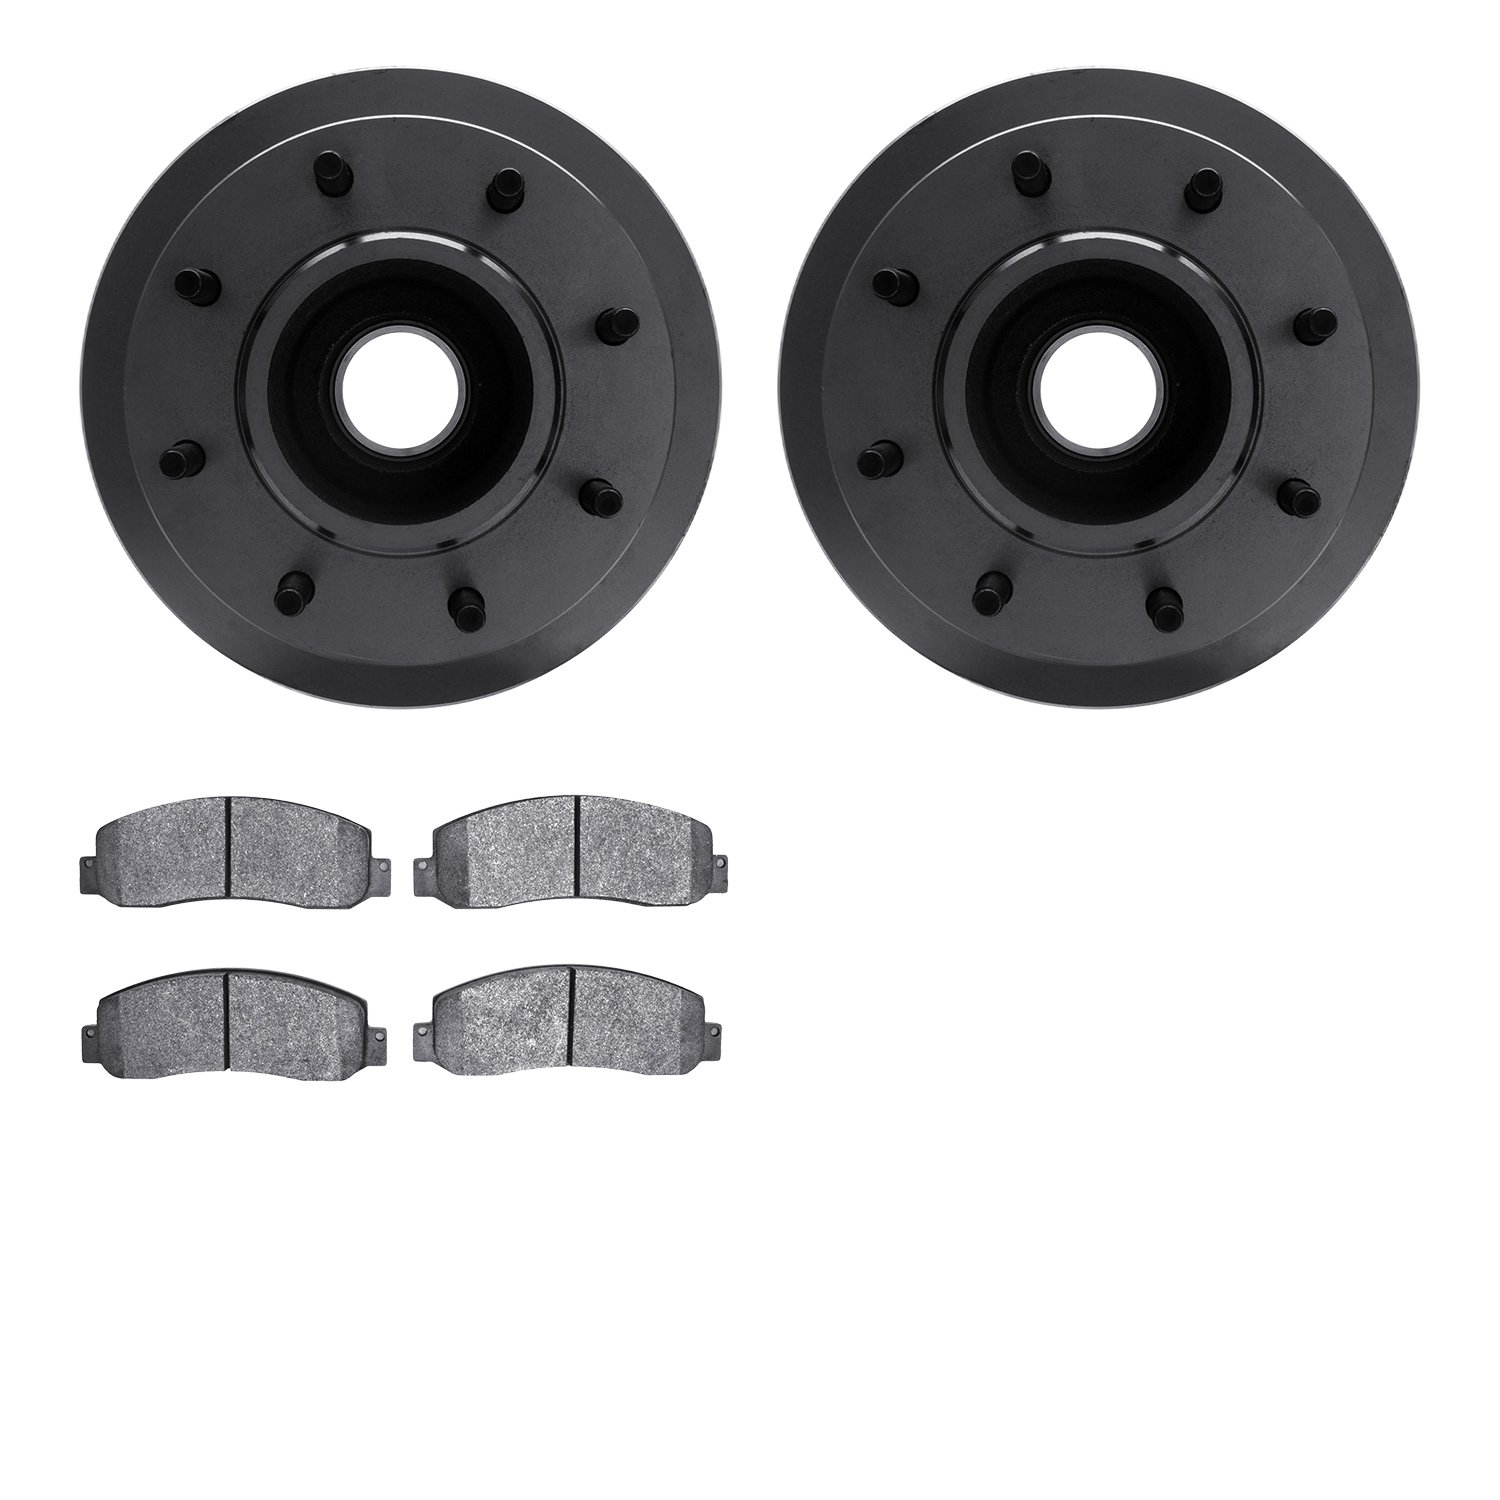 6402-54272 Brake Rotors with Ultimate-Duty Brake Pads, 2006-2010 Ford/Lincoln/Mercury/Mazda, Position: Front